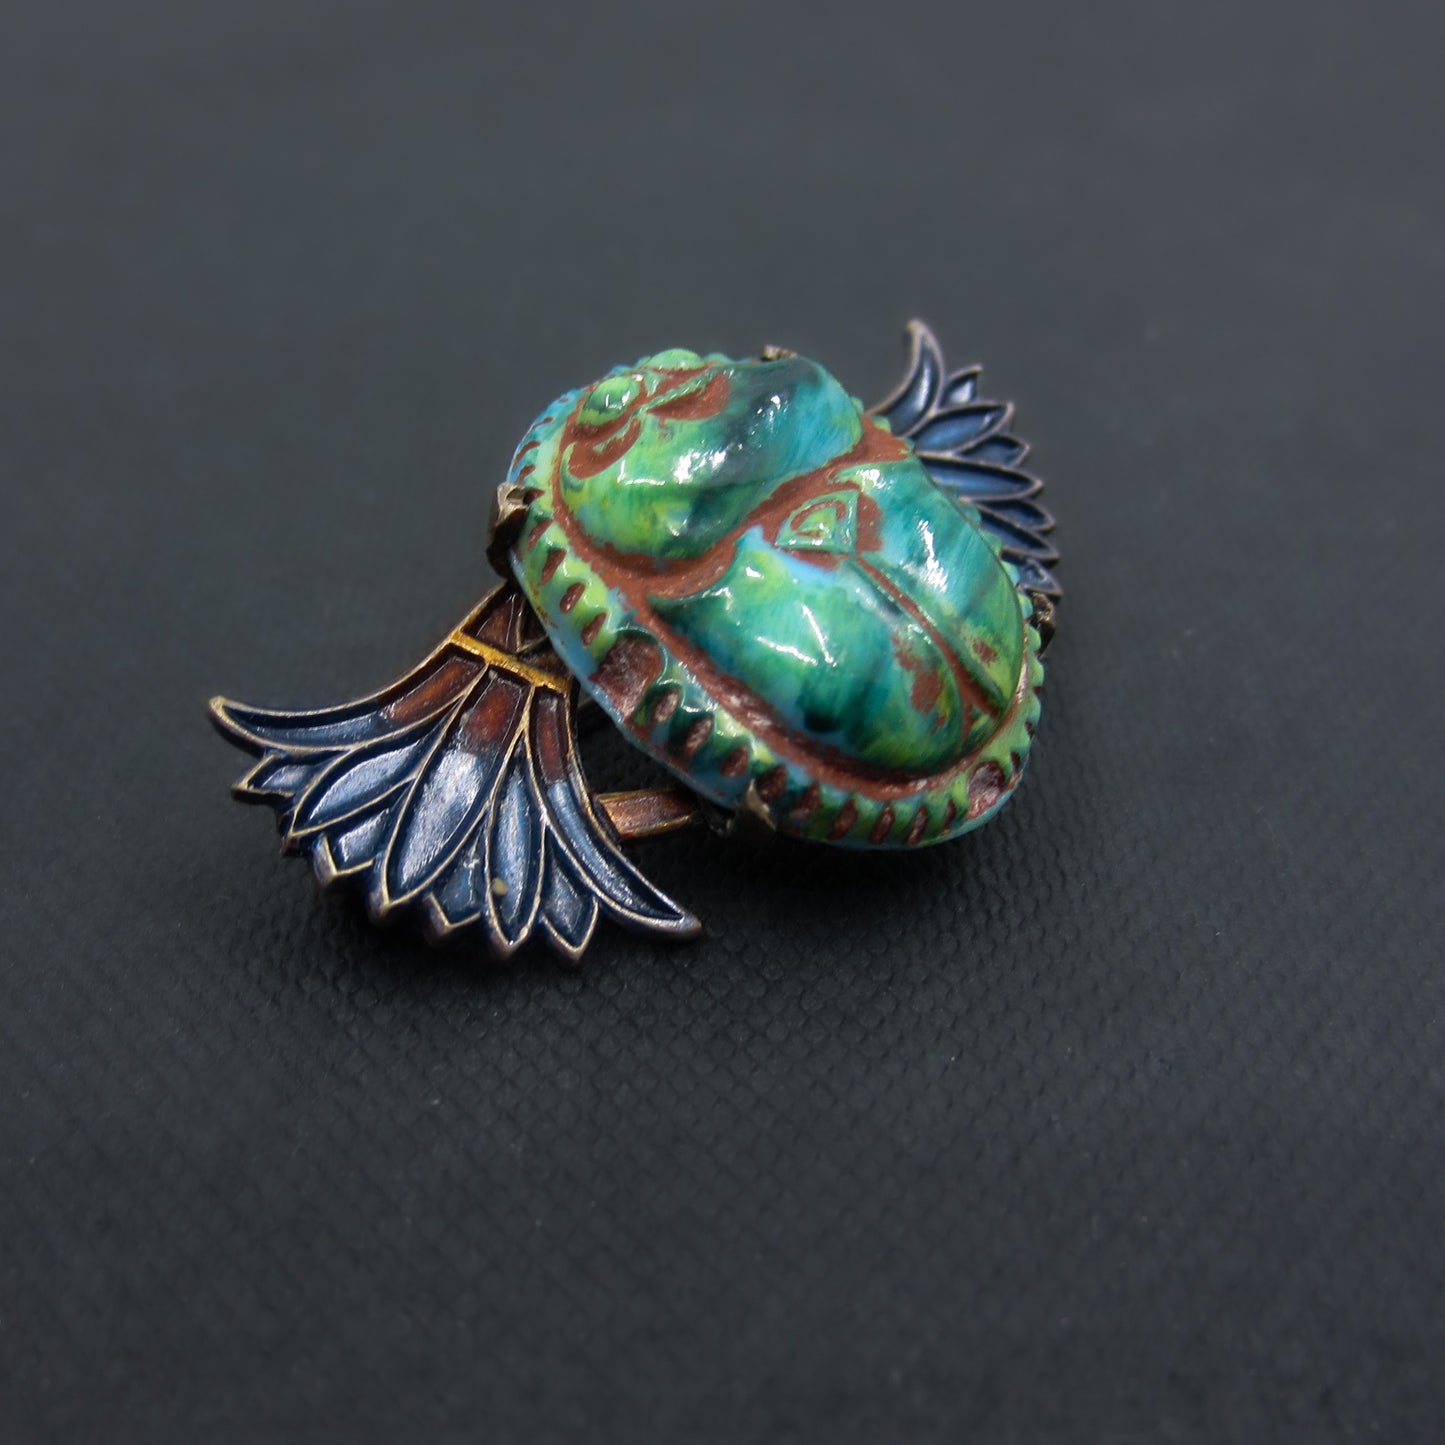 Egyptian Revival Enamel and Faïence Winged Scarab Brooch Brass c. 1900